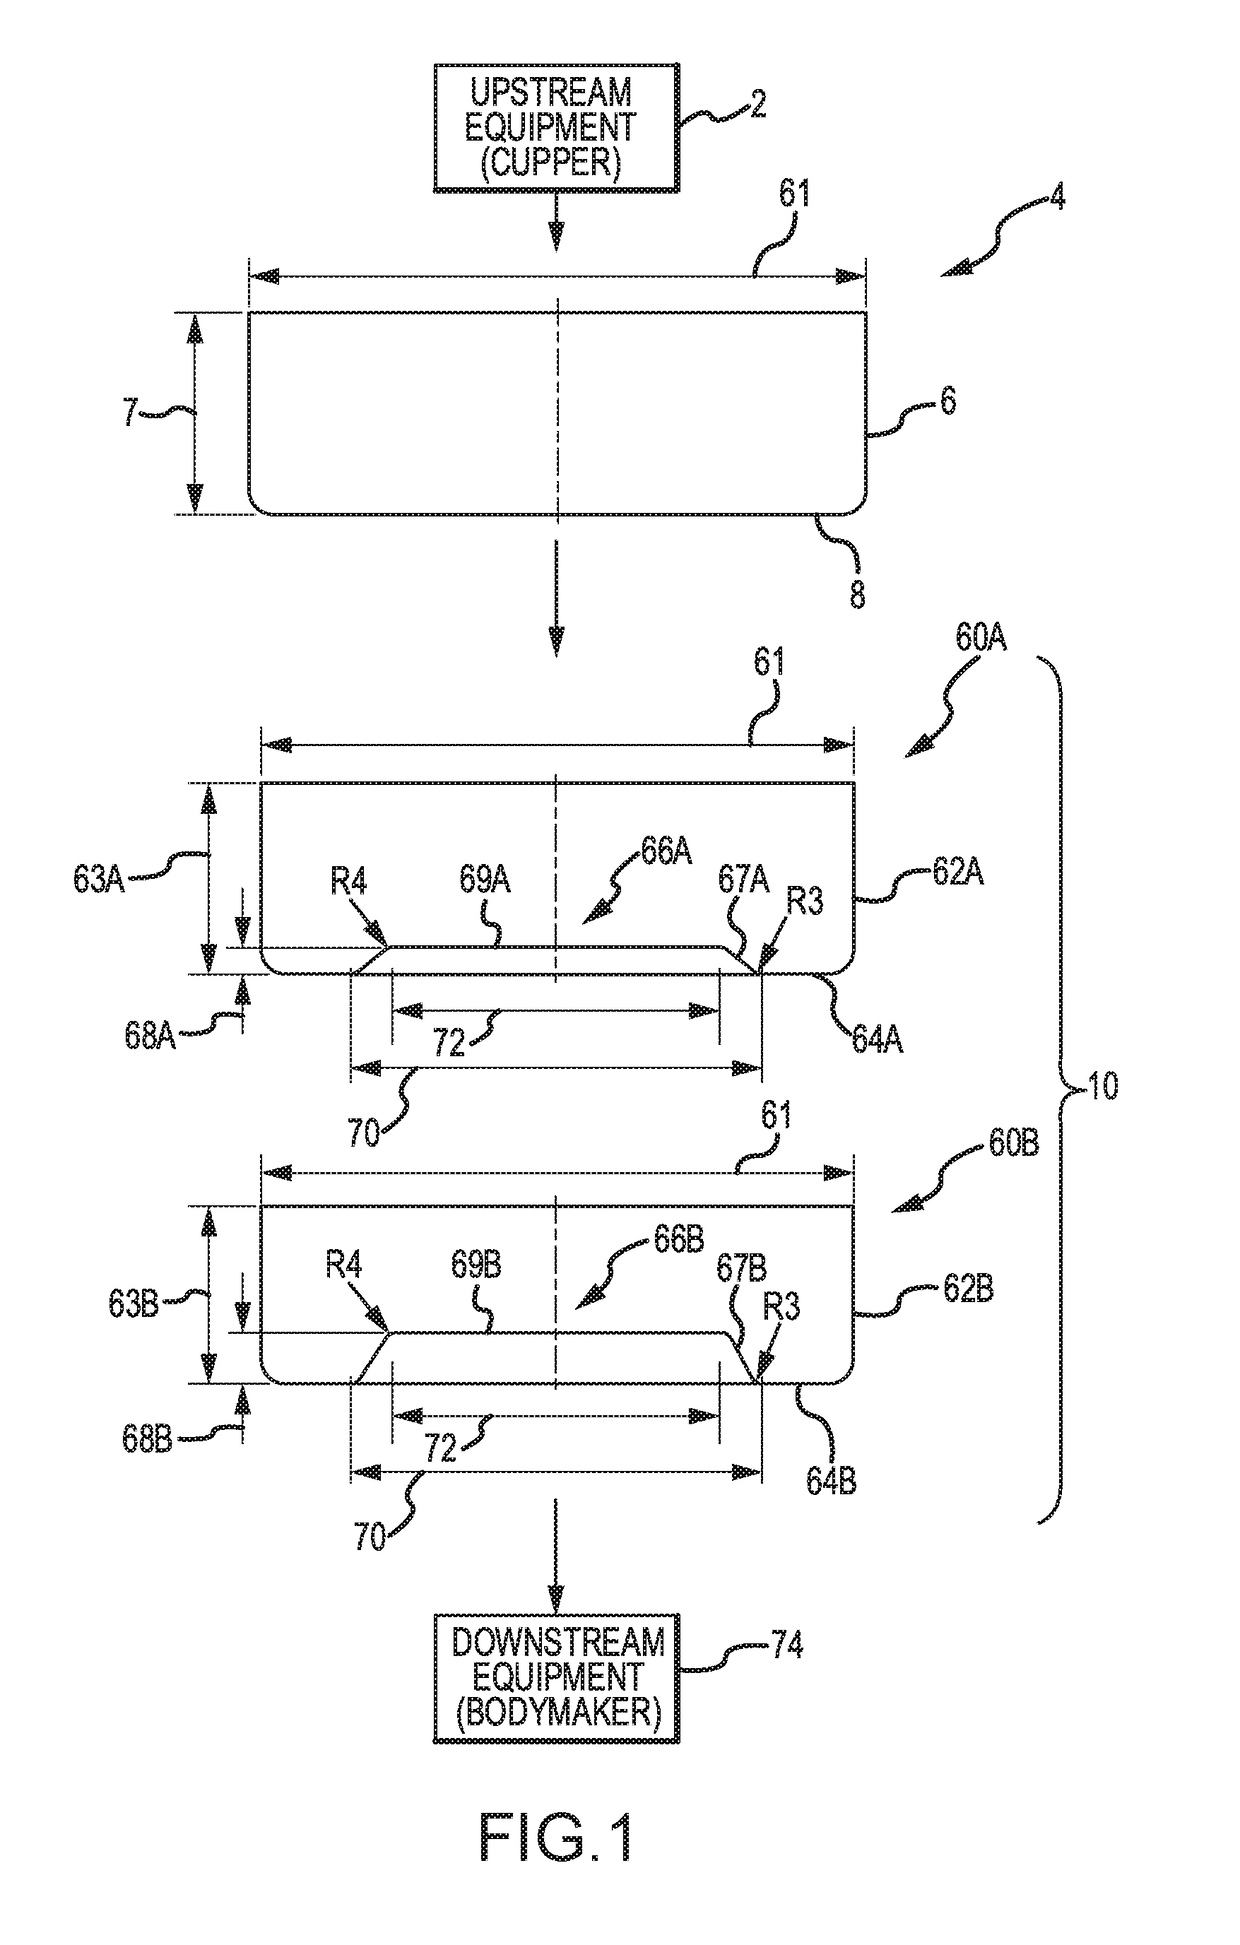 Method and apparatus of forming a deboss in a closed end of a metallic cup